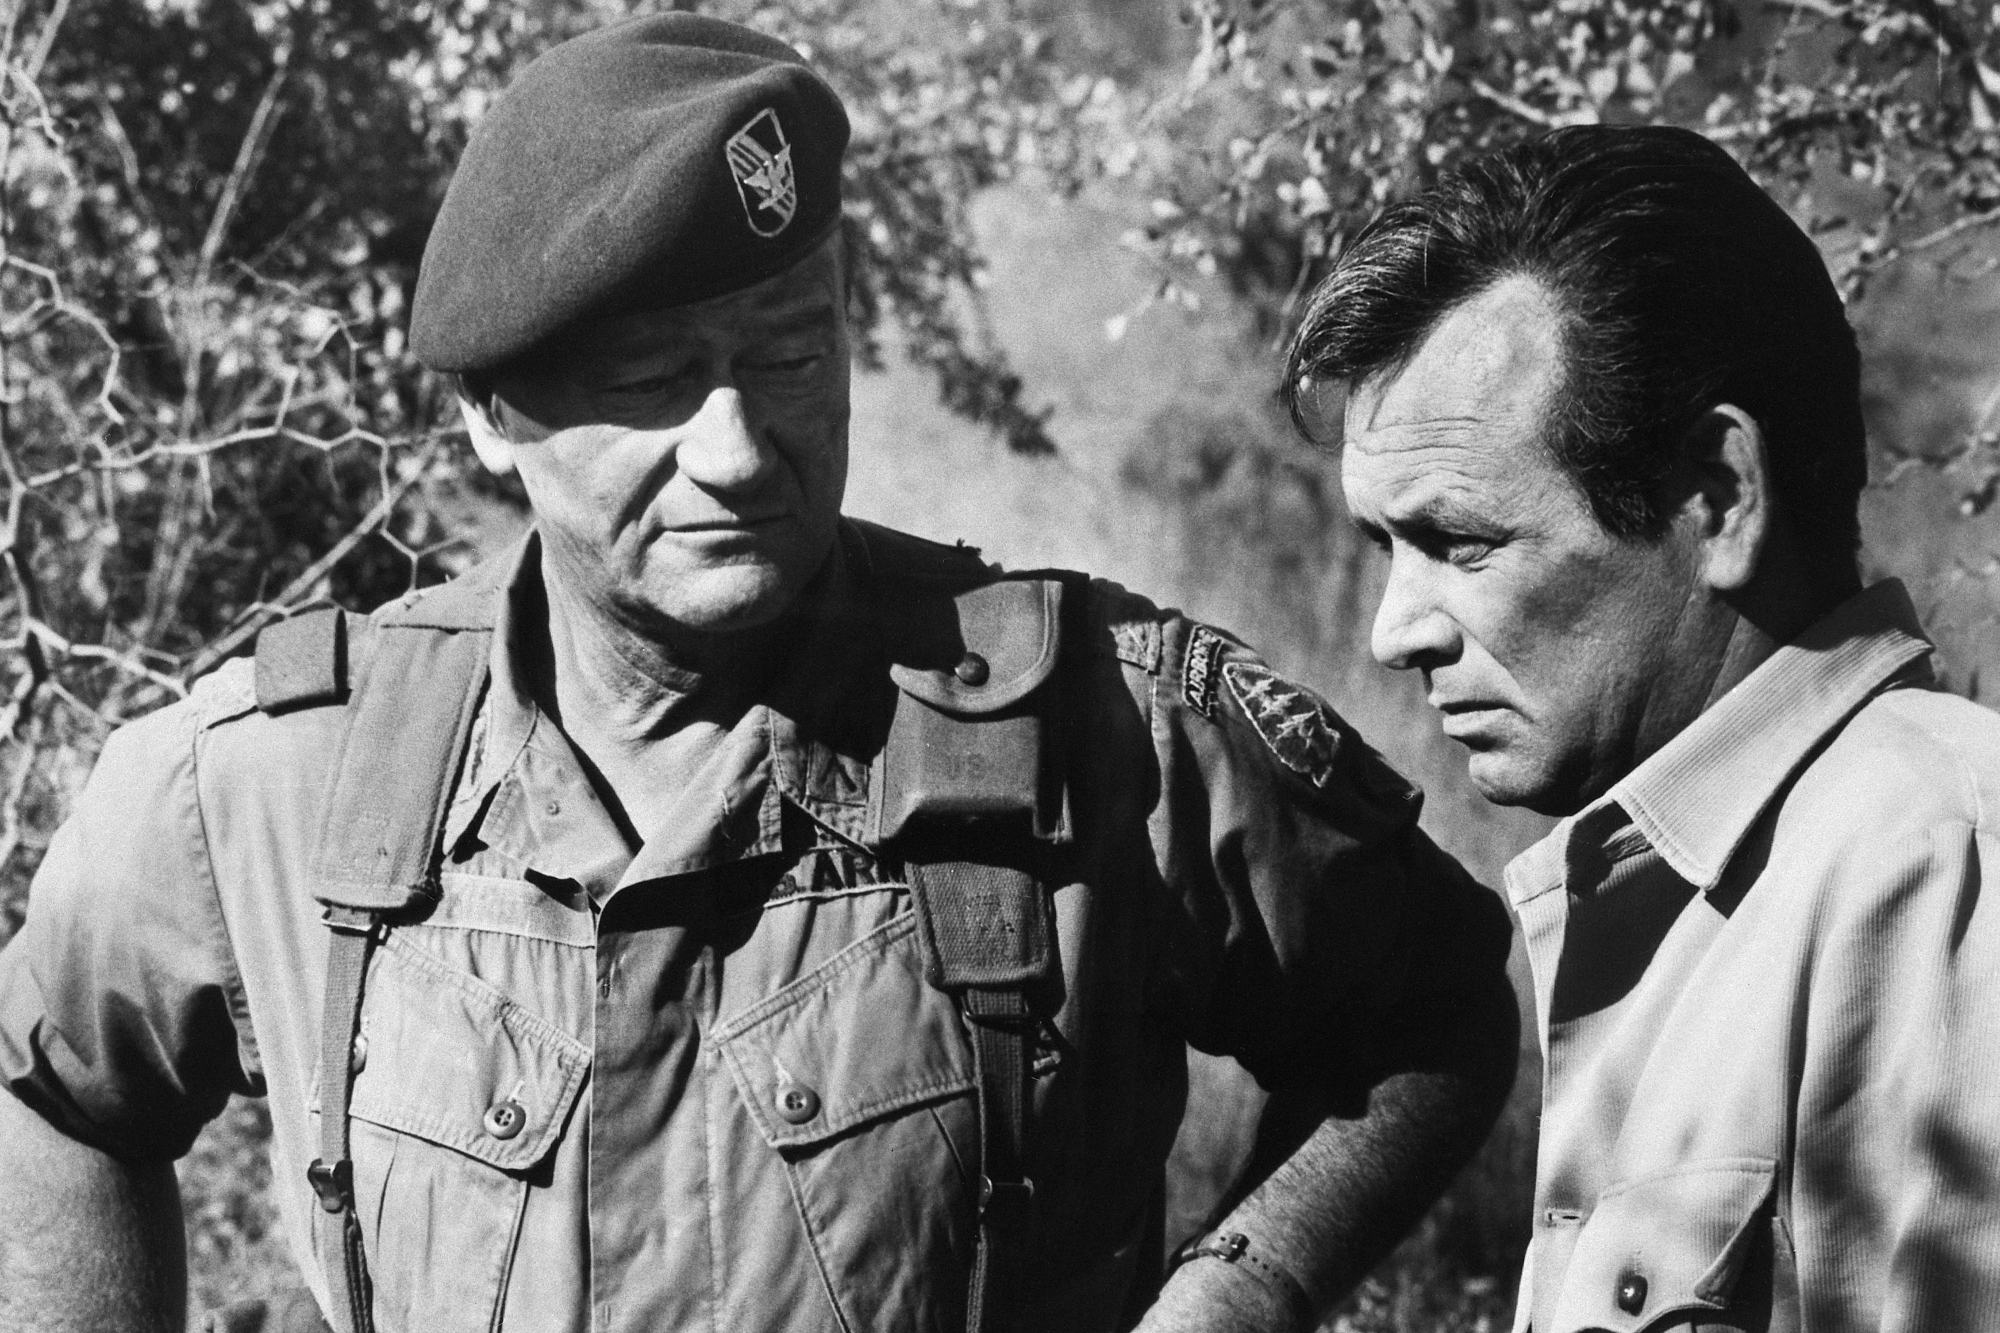 'The Green Berets' John Wayne as Col. Mike Kirby and David Janssen as George Beckworth in a black-and-white photo. Wayne is looking at Janssen, who is looking off.